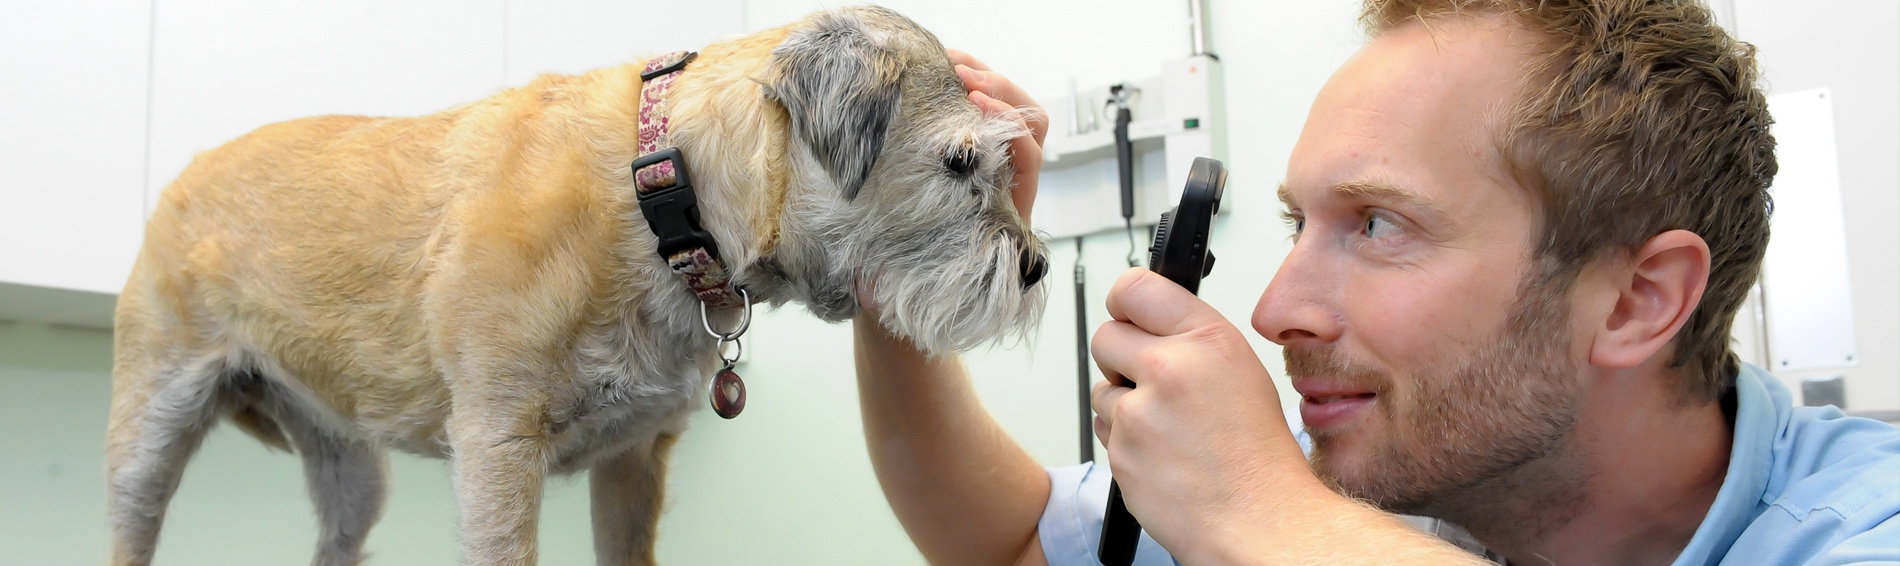 Request An Appointment | Spinney Vets Northampton